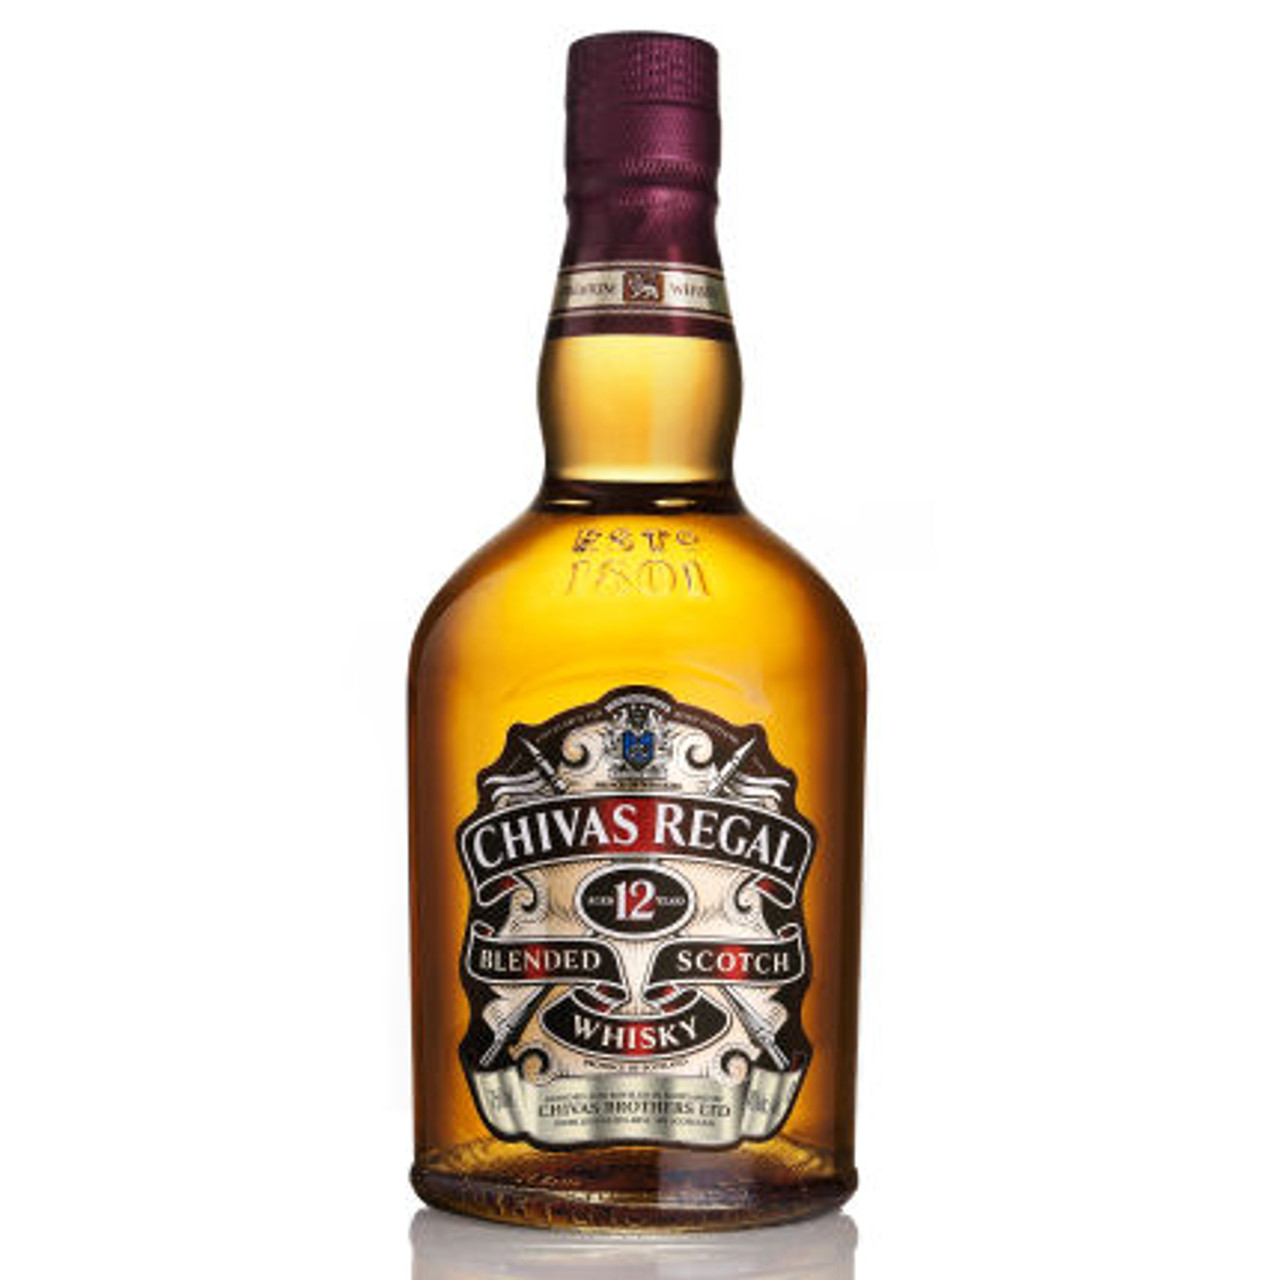 Markér Marco Polo lanthan Chivas Regal 12 Year Old Blended Scotch 750ml